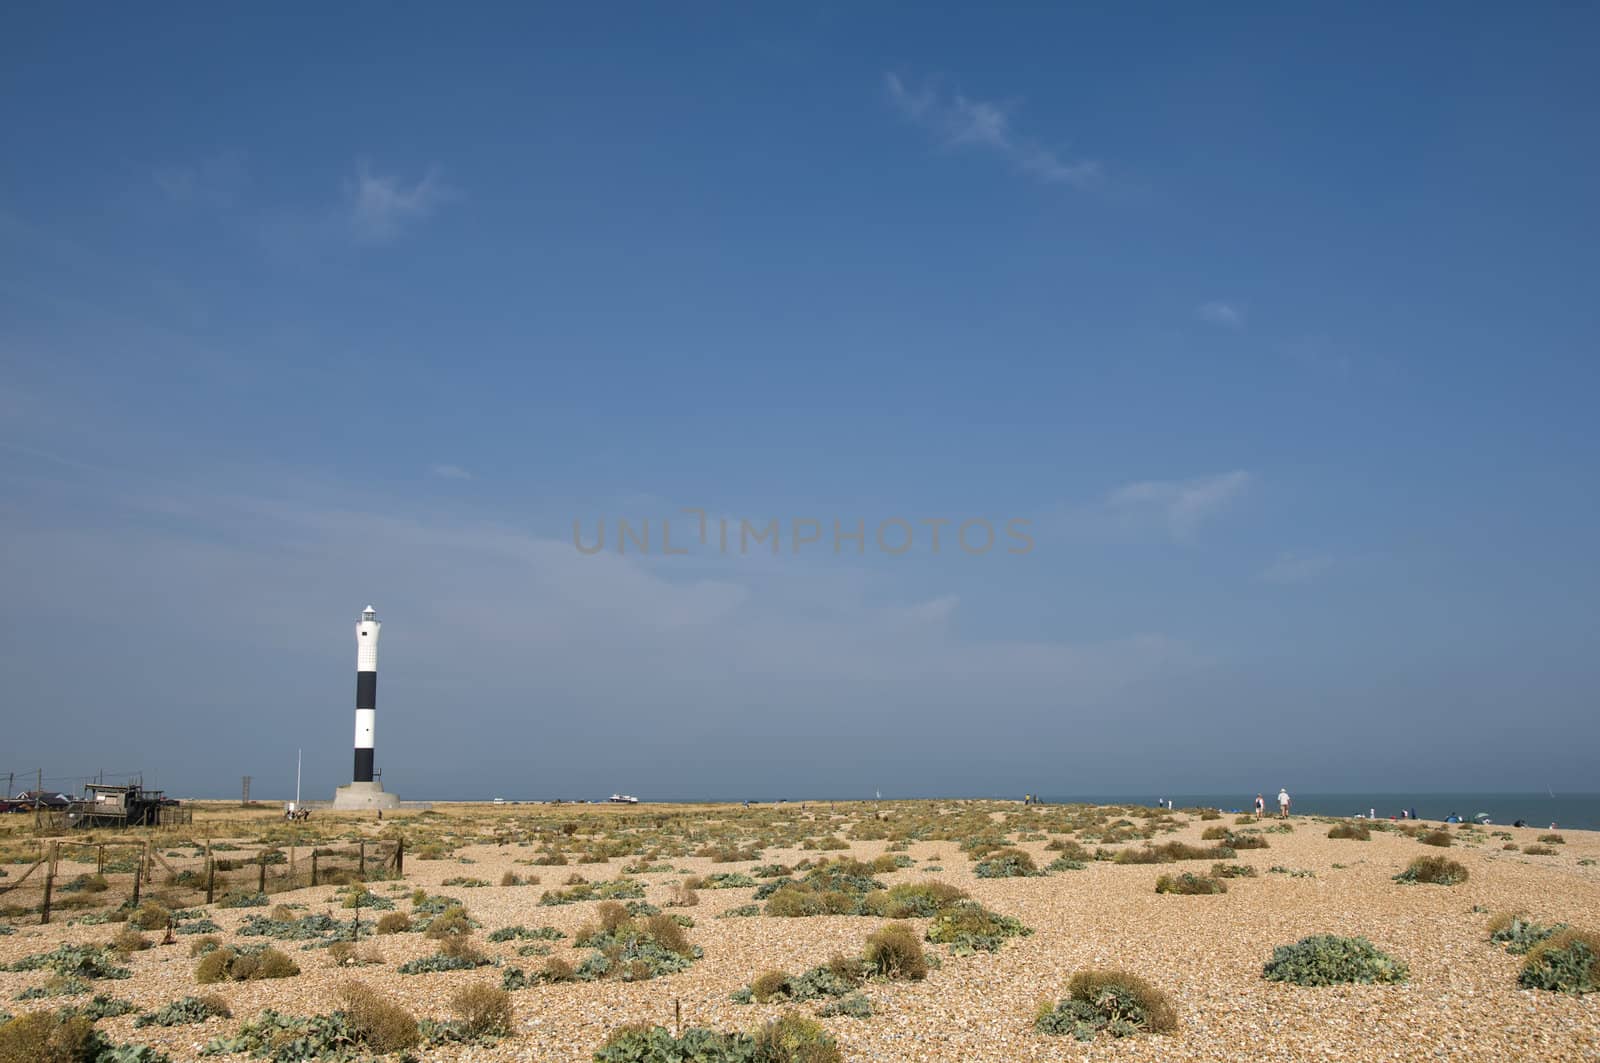 The pebble beach at Dungeness with the new lighthouse in the distance